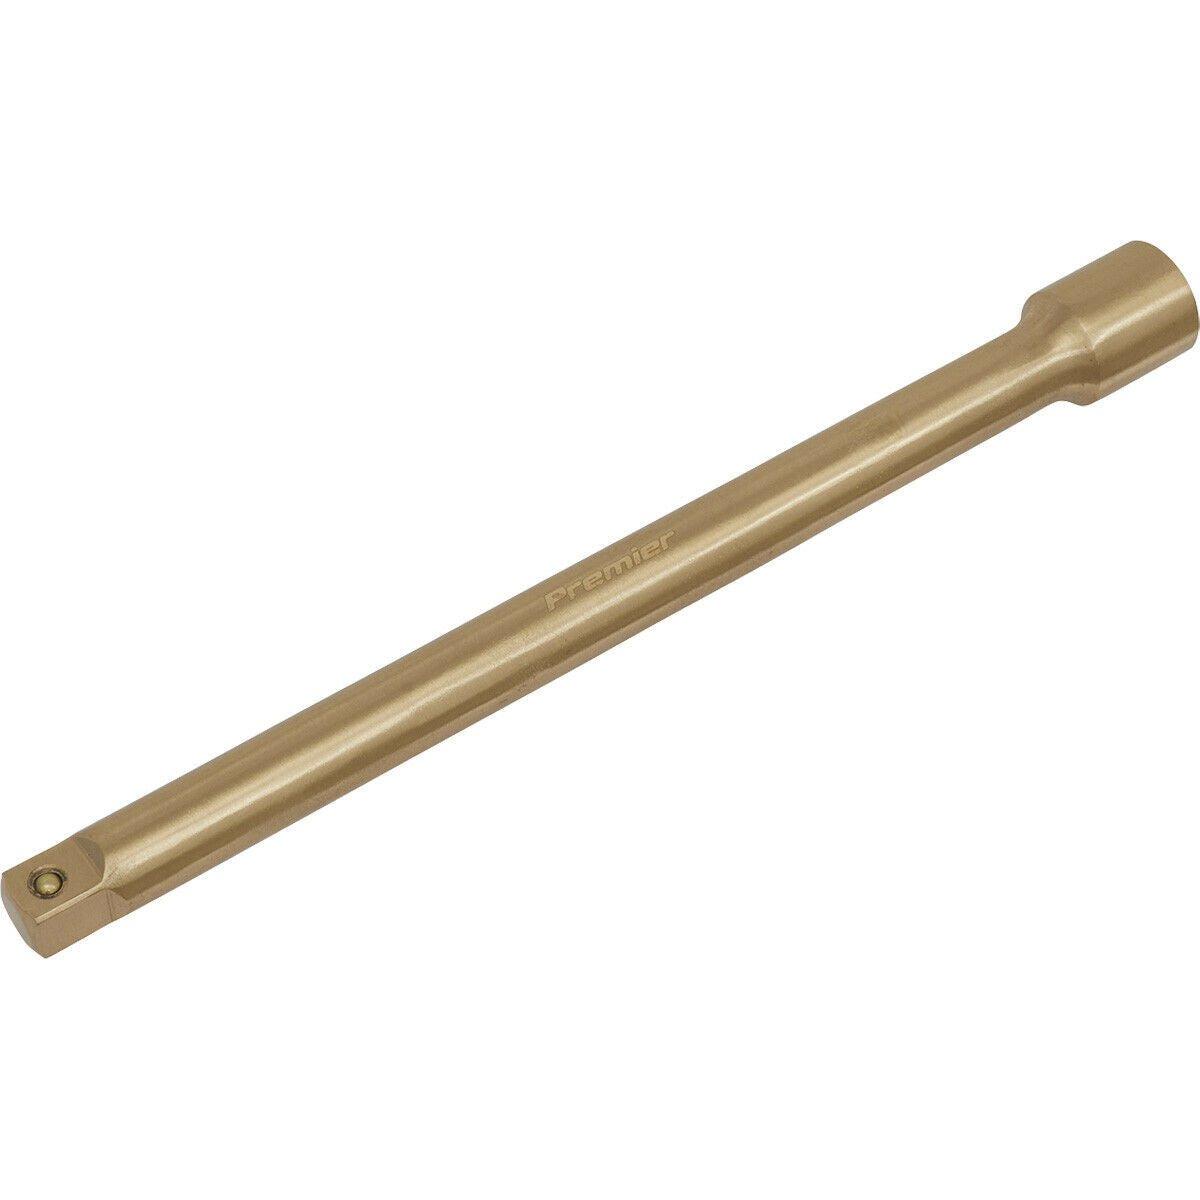 250mm Non-Sparking Extension Bar - 1/2